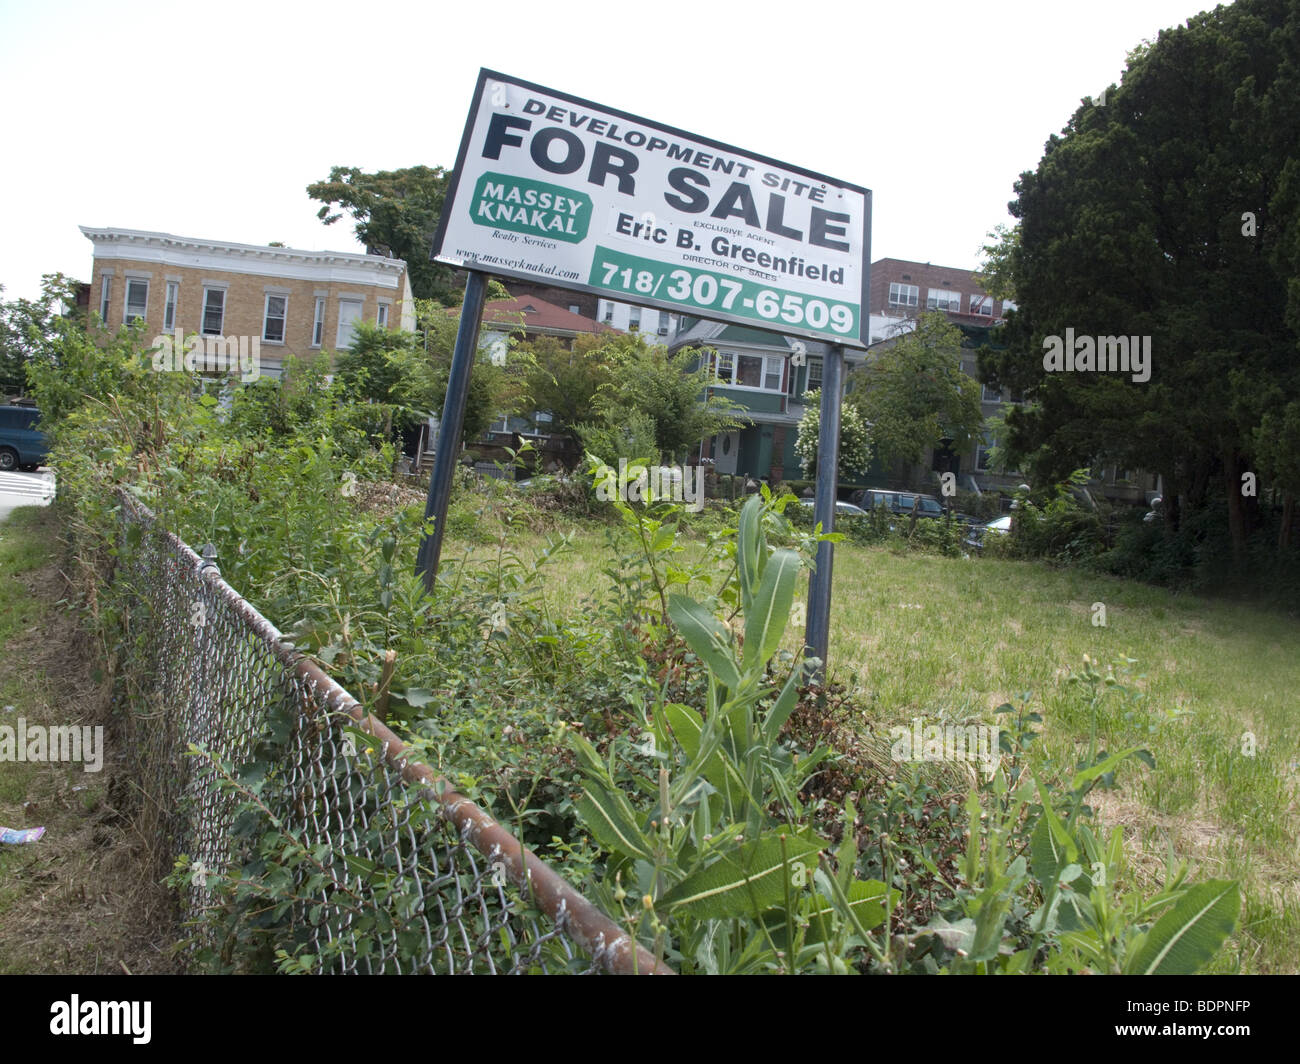 Many lots stand for sale and neglected in the USA in economically troubled times. Brooklyn, New York. Stock Photo